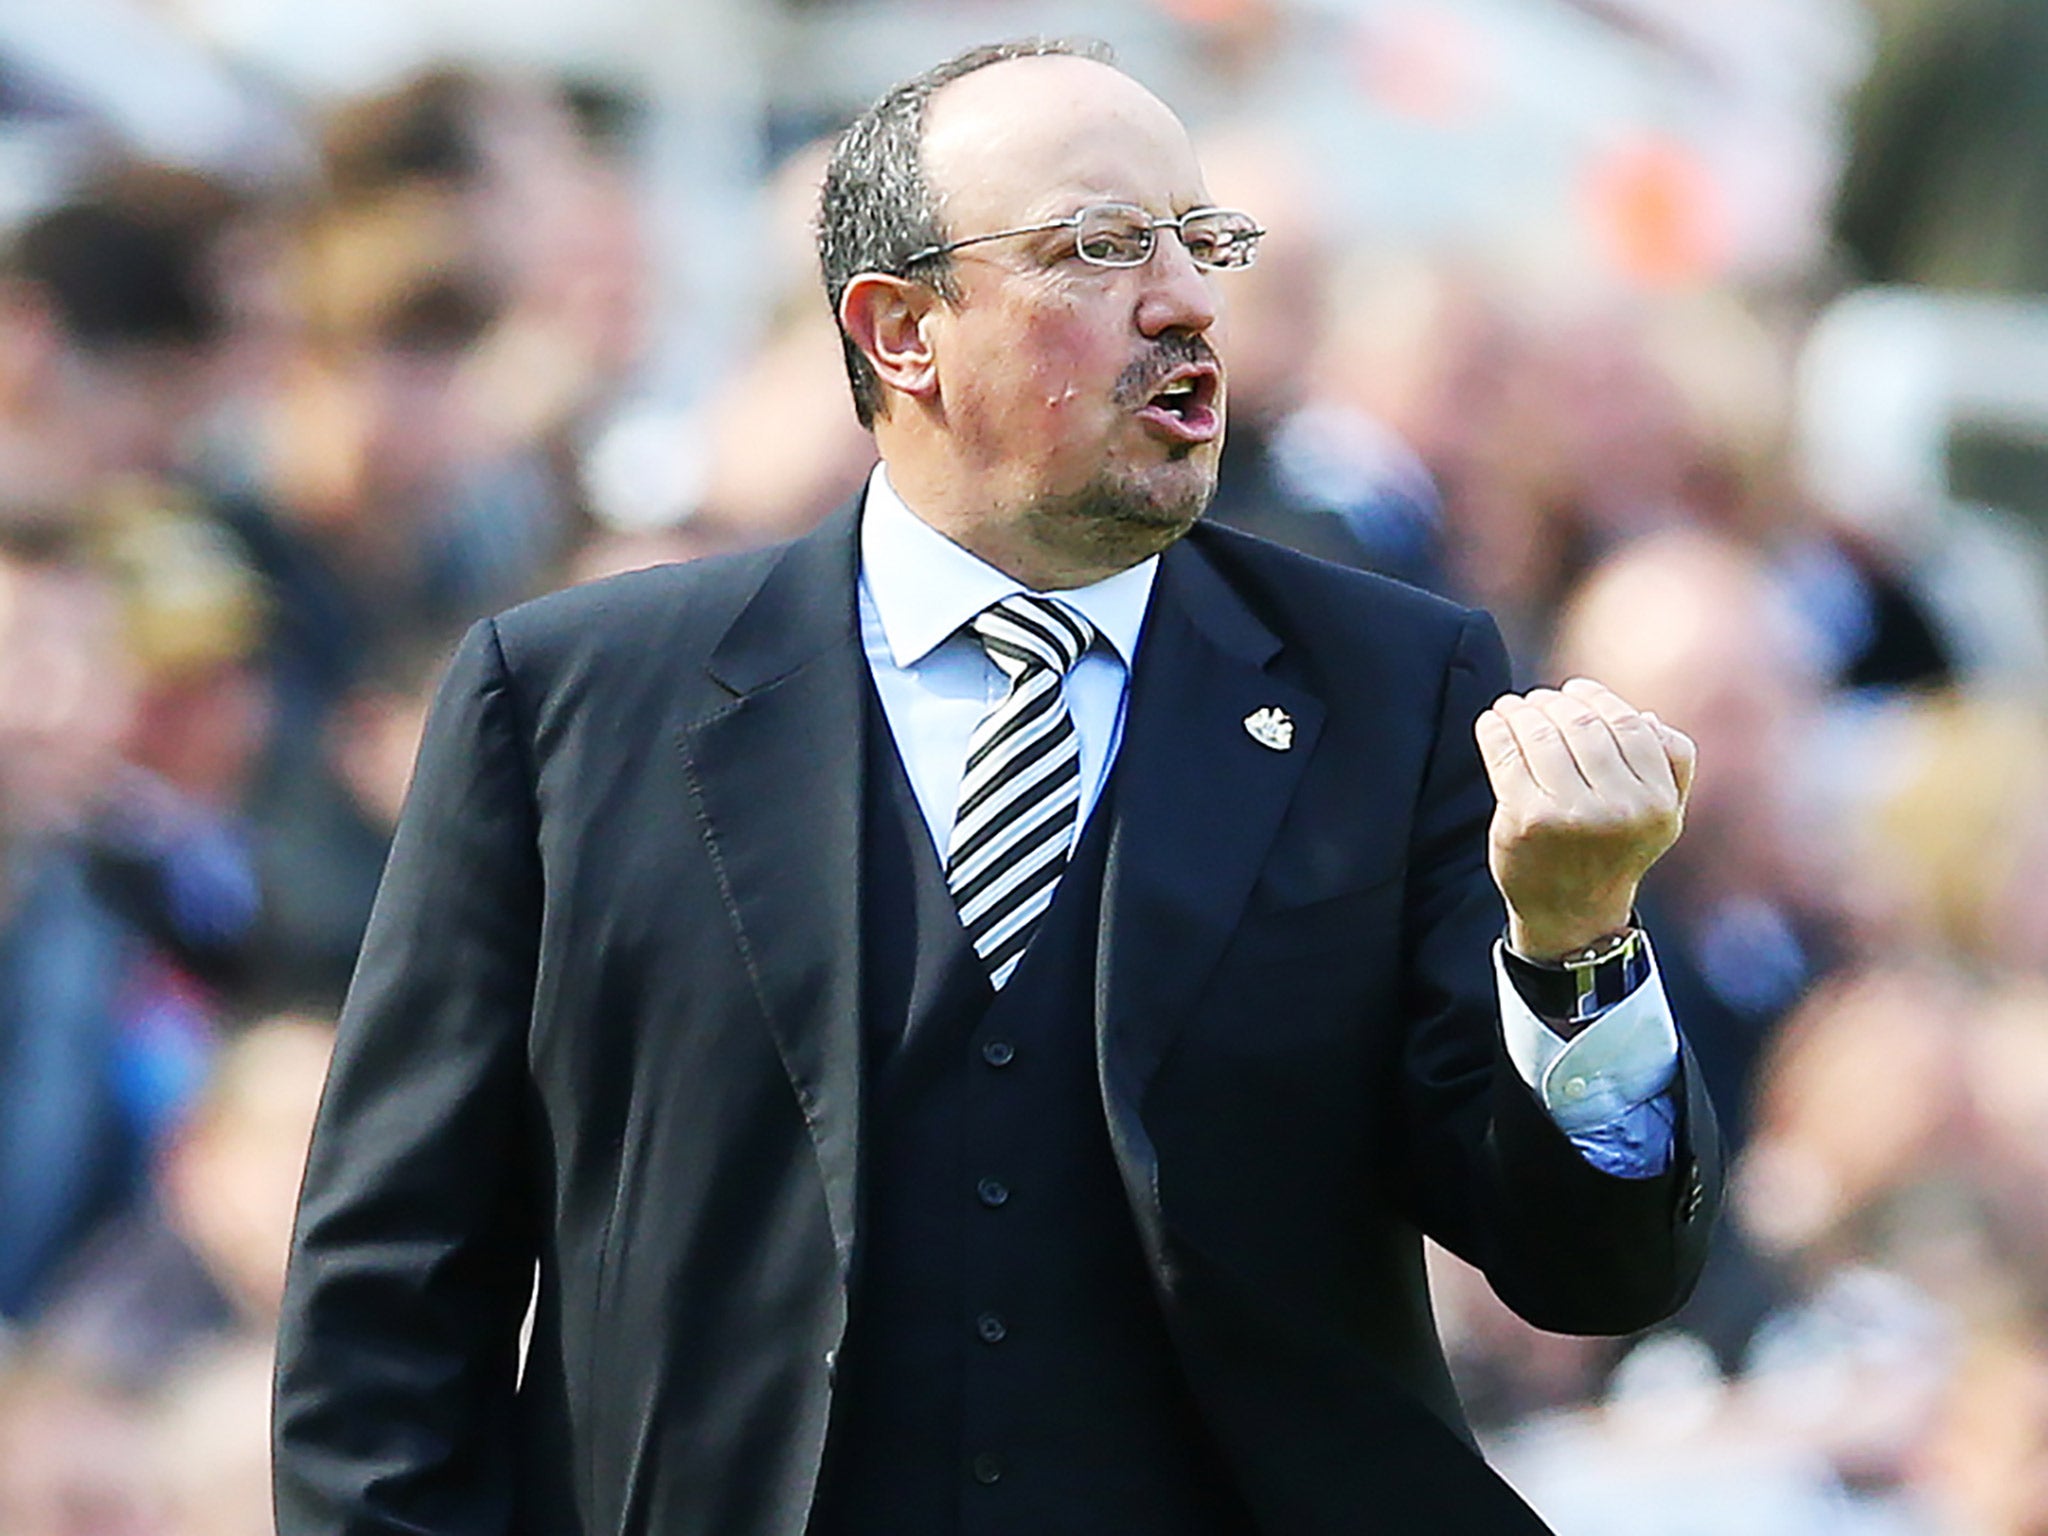 Rafa Benitez will hope to take Newcastle back to the Premier League at the first attempt